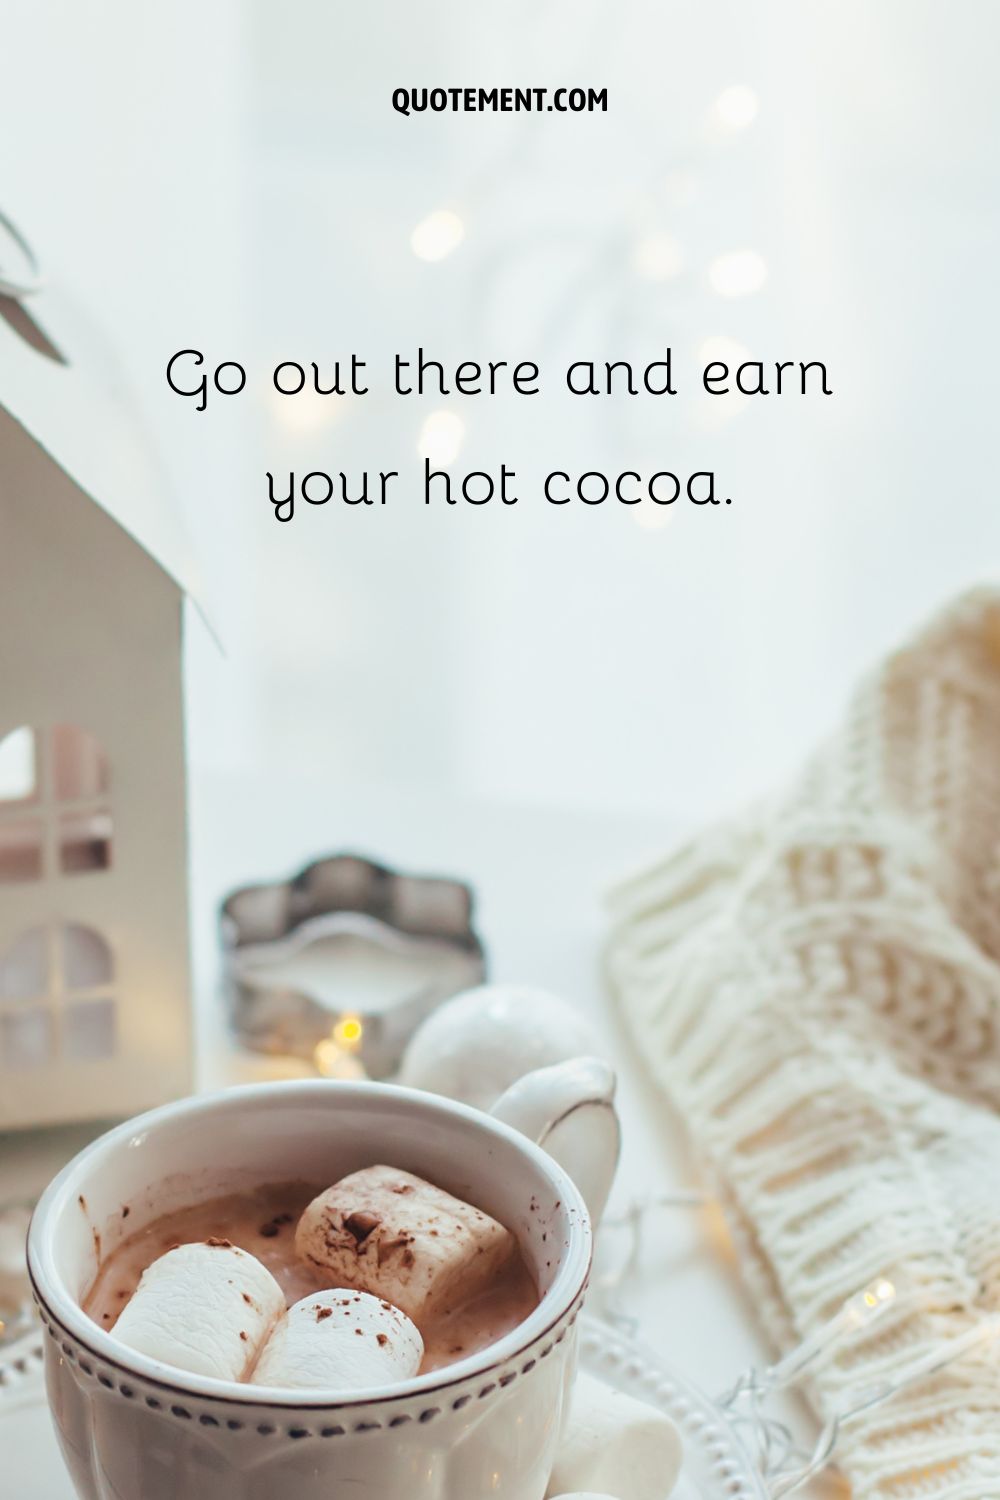 A mug of hot cocoa topped with marshmallows, a lit candle, and a knitted throw